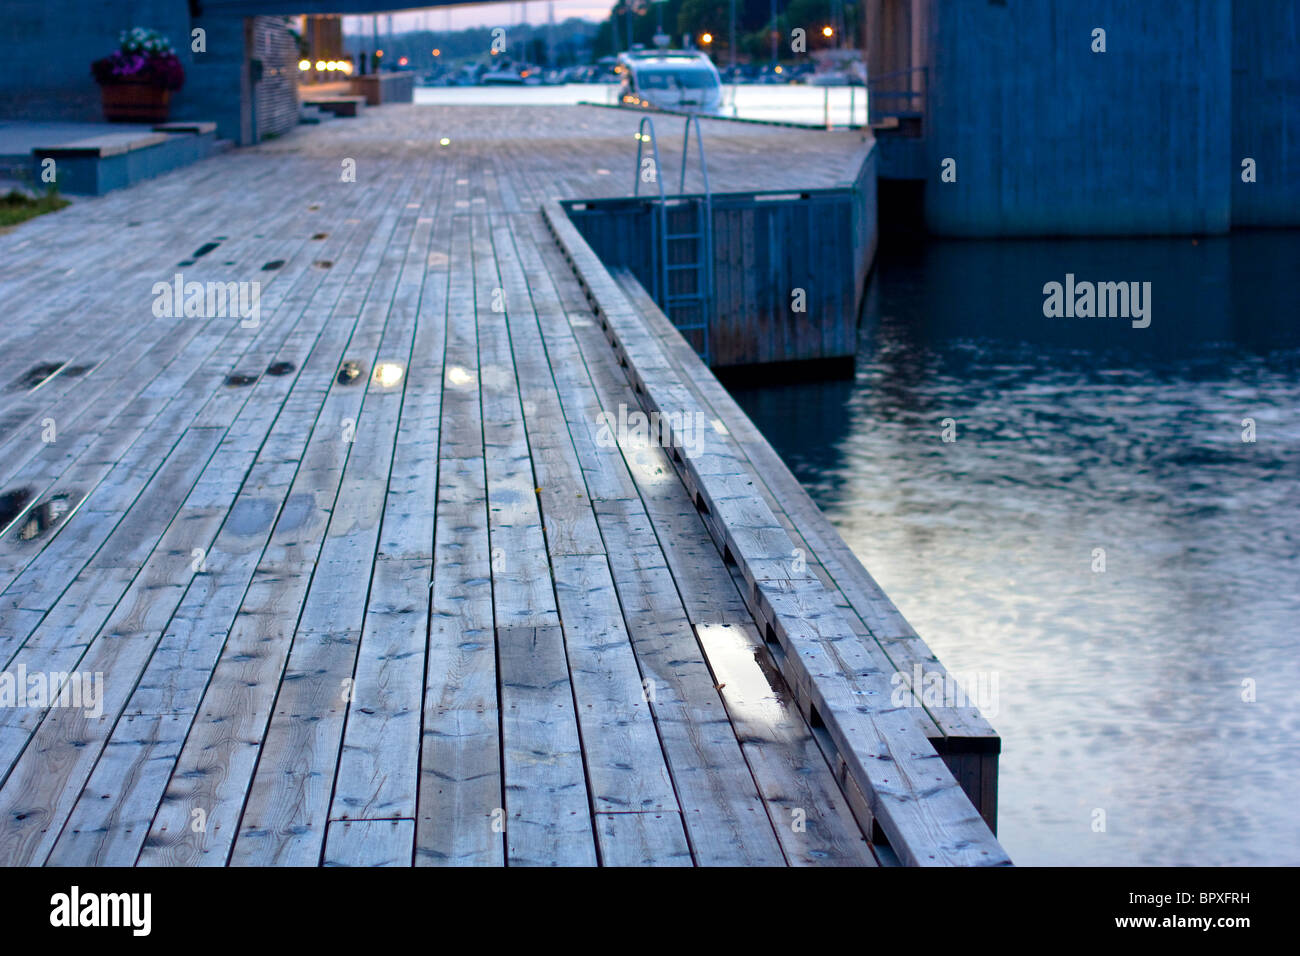 A wooden boardwalk at dusk in Tonsberg, Norway. Stock Photo